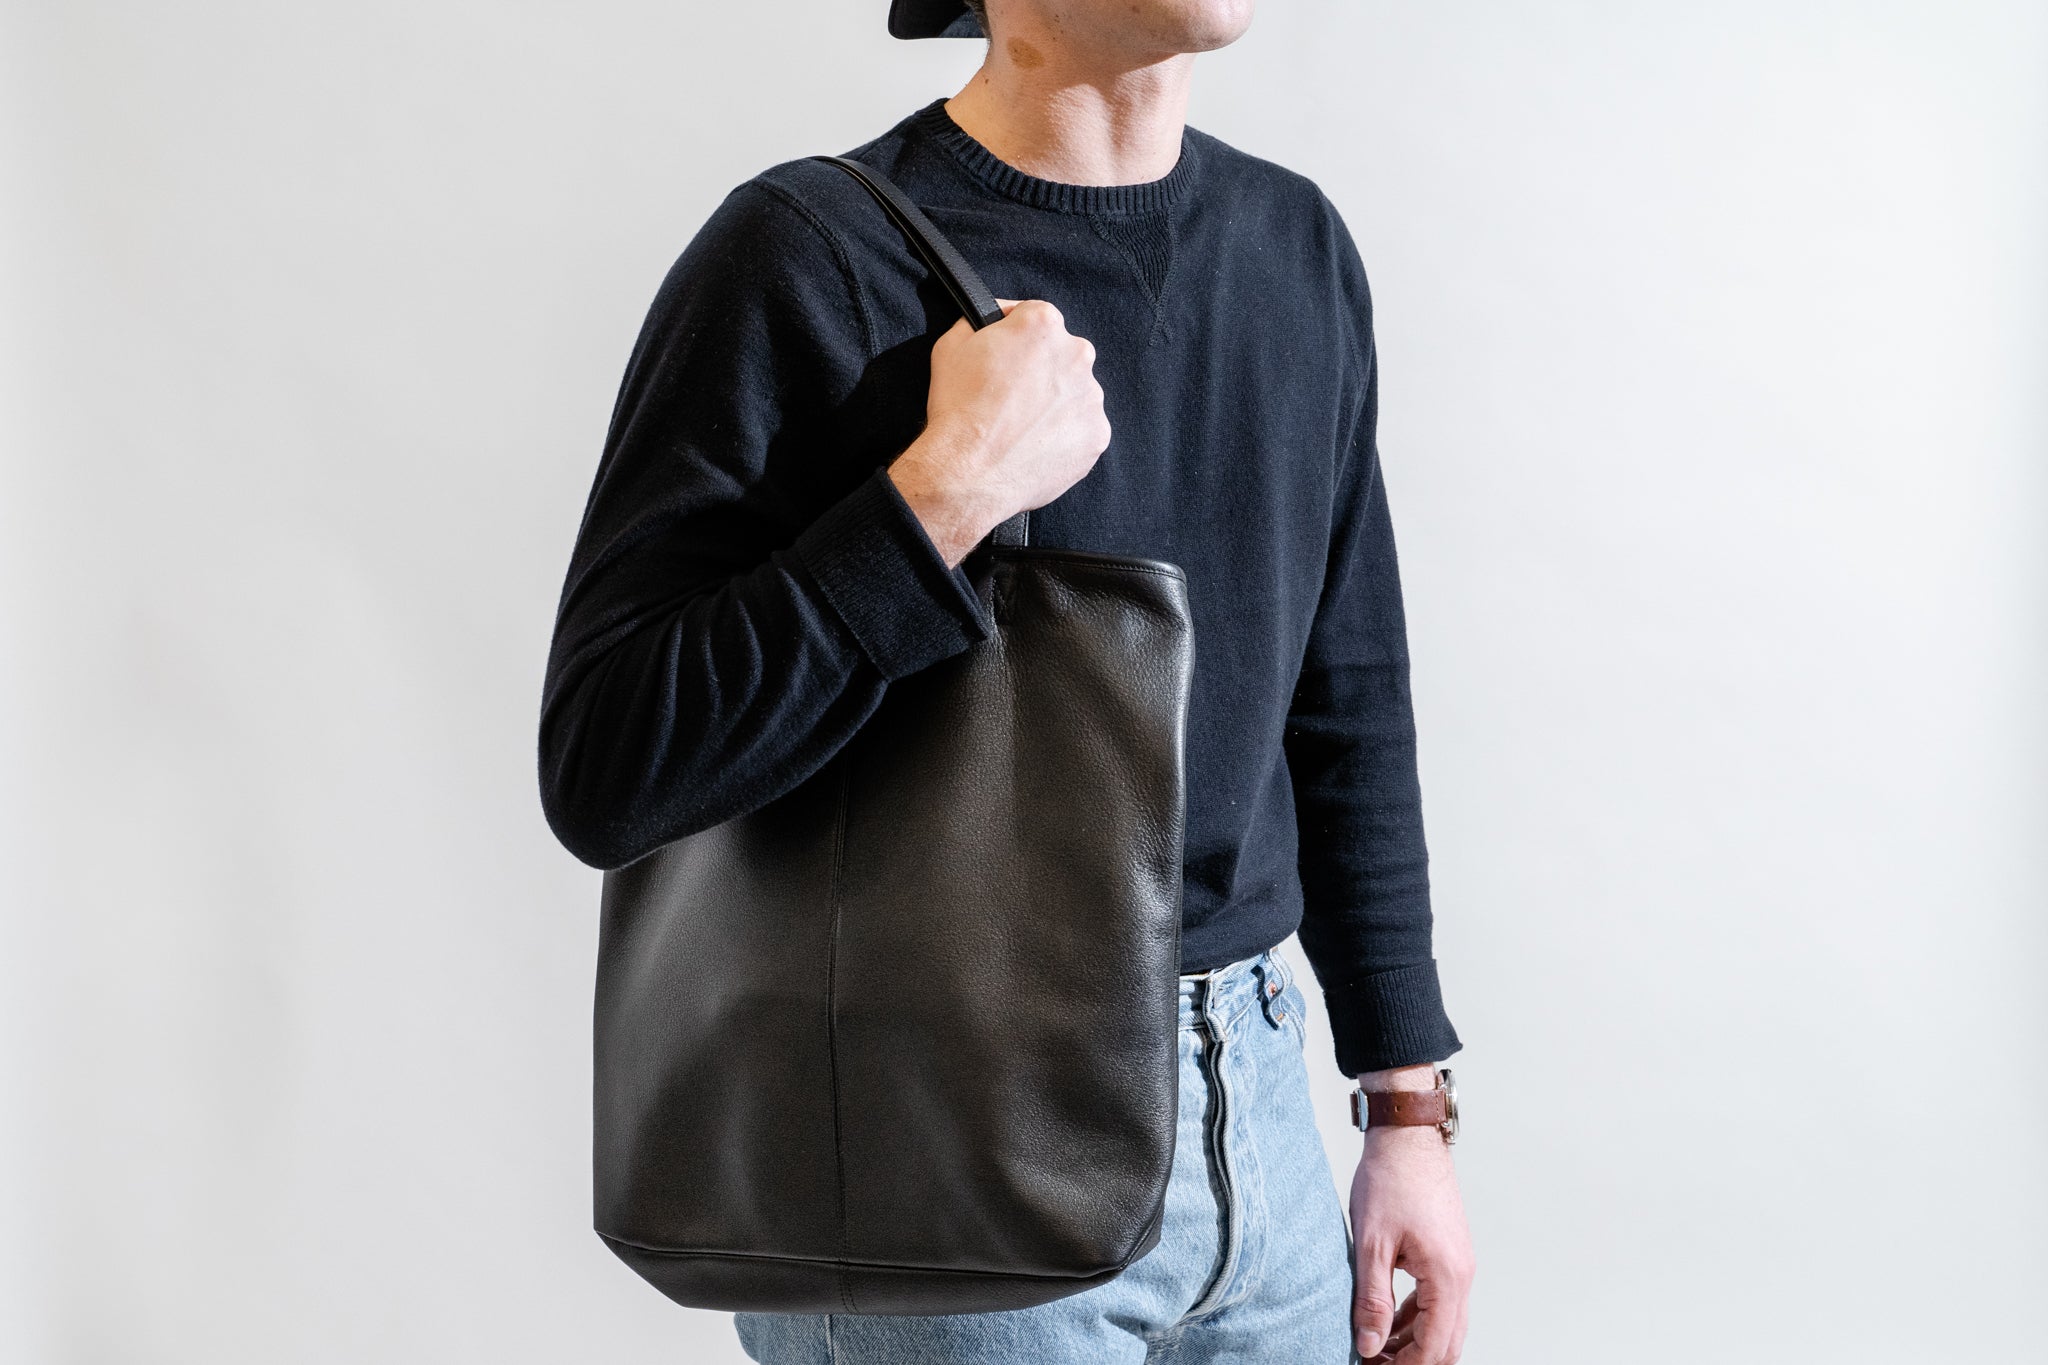 A person wearing the Leatherology tote on their shoulder